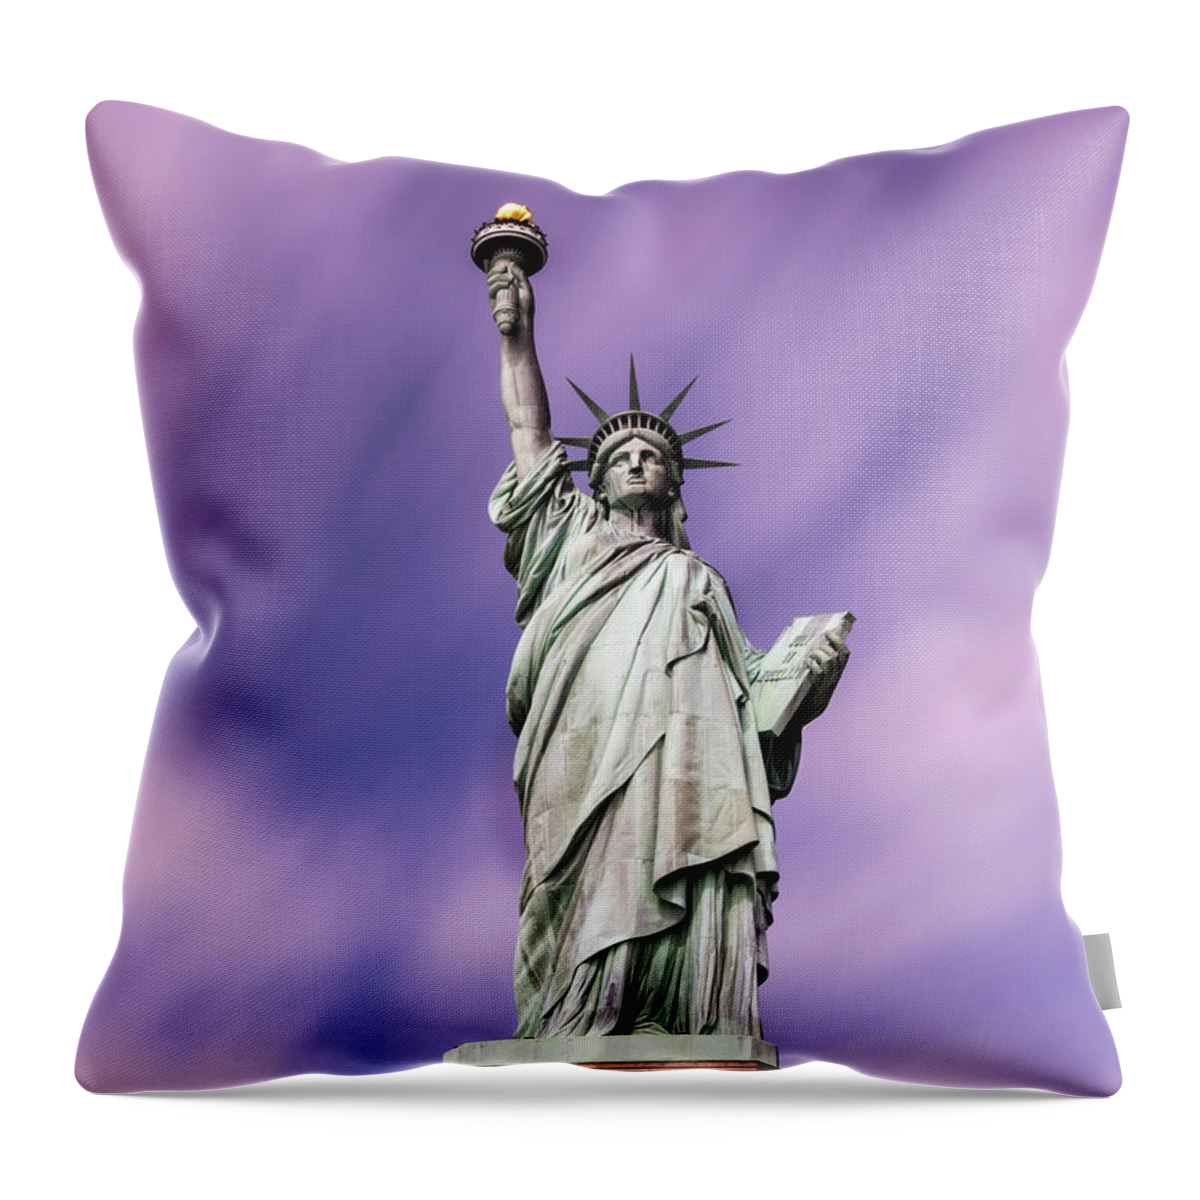 Statue Throw Pillow featuring the photograph Statue of Liberty by Jaime Mercado